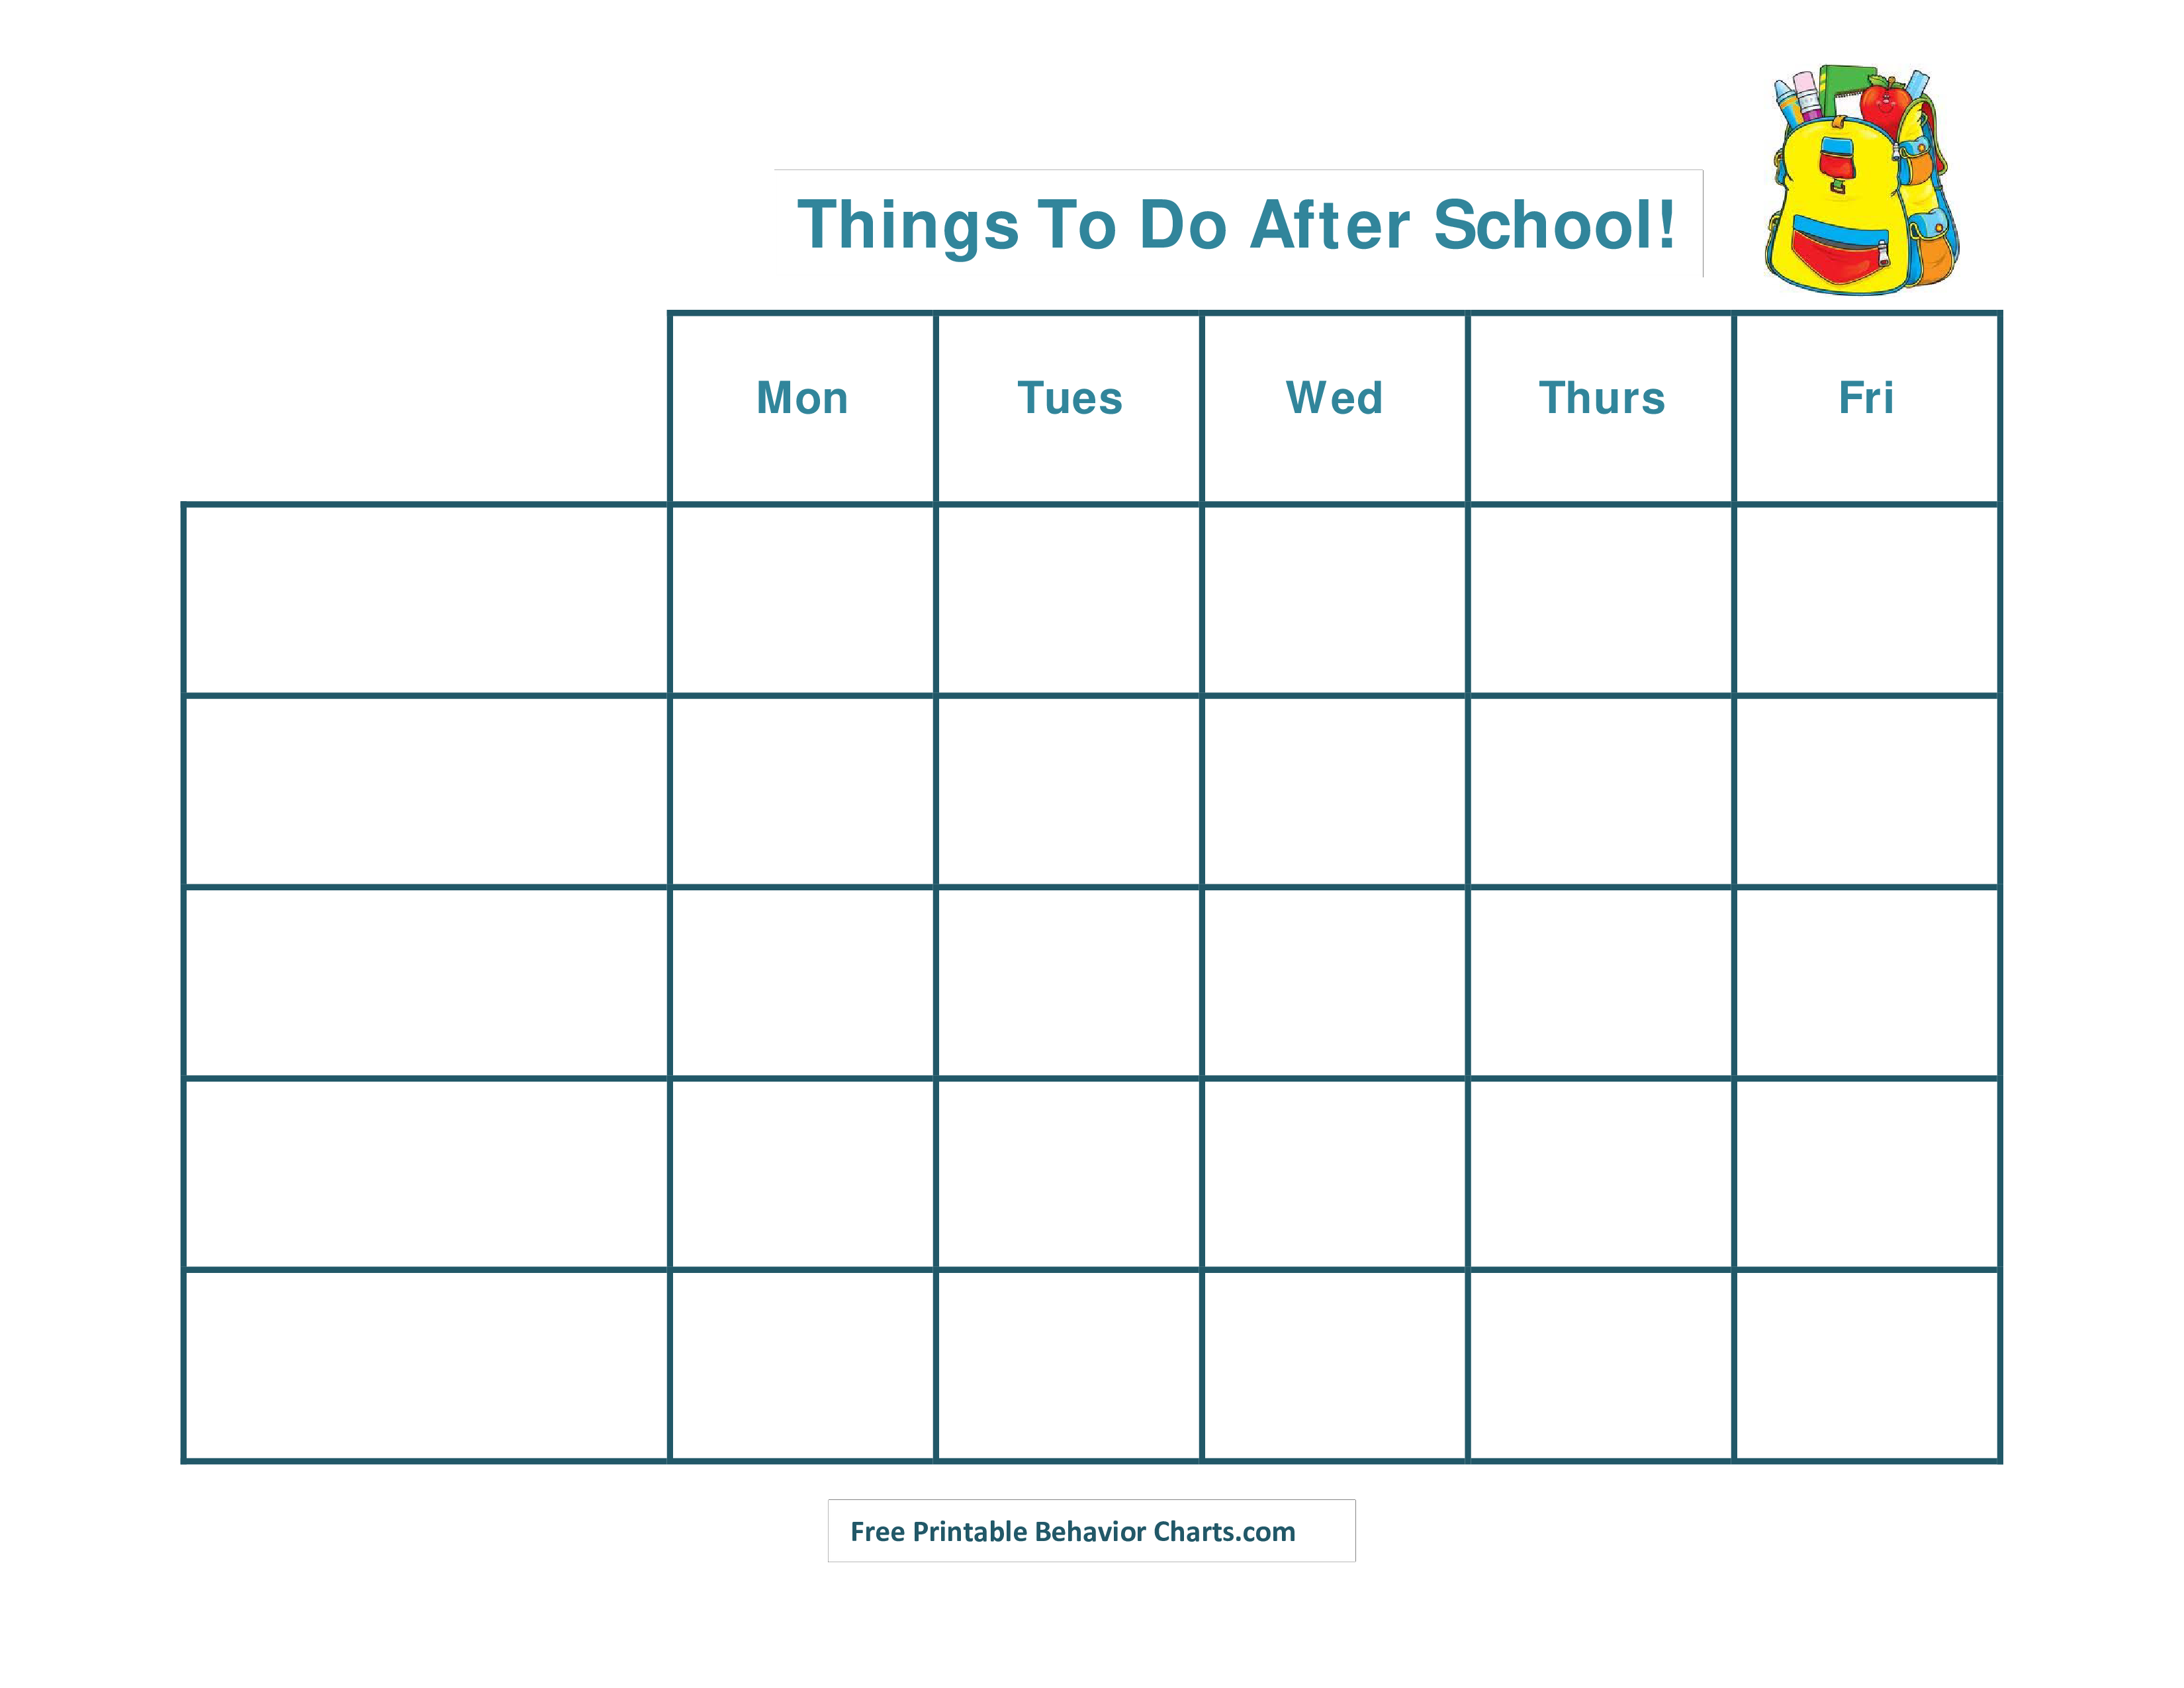 Printable After School Schedule Templates at allbusinesstemplates com